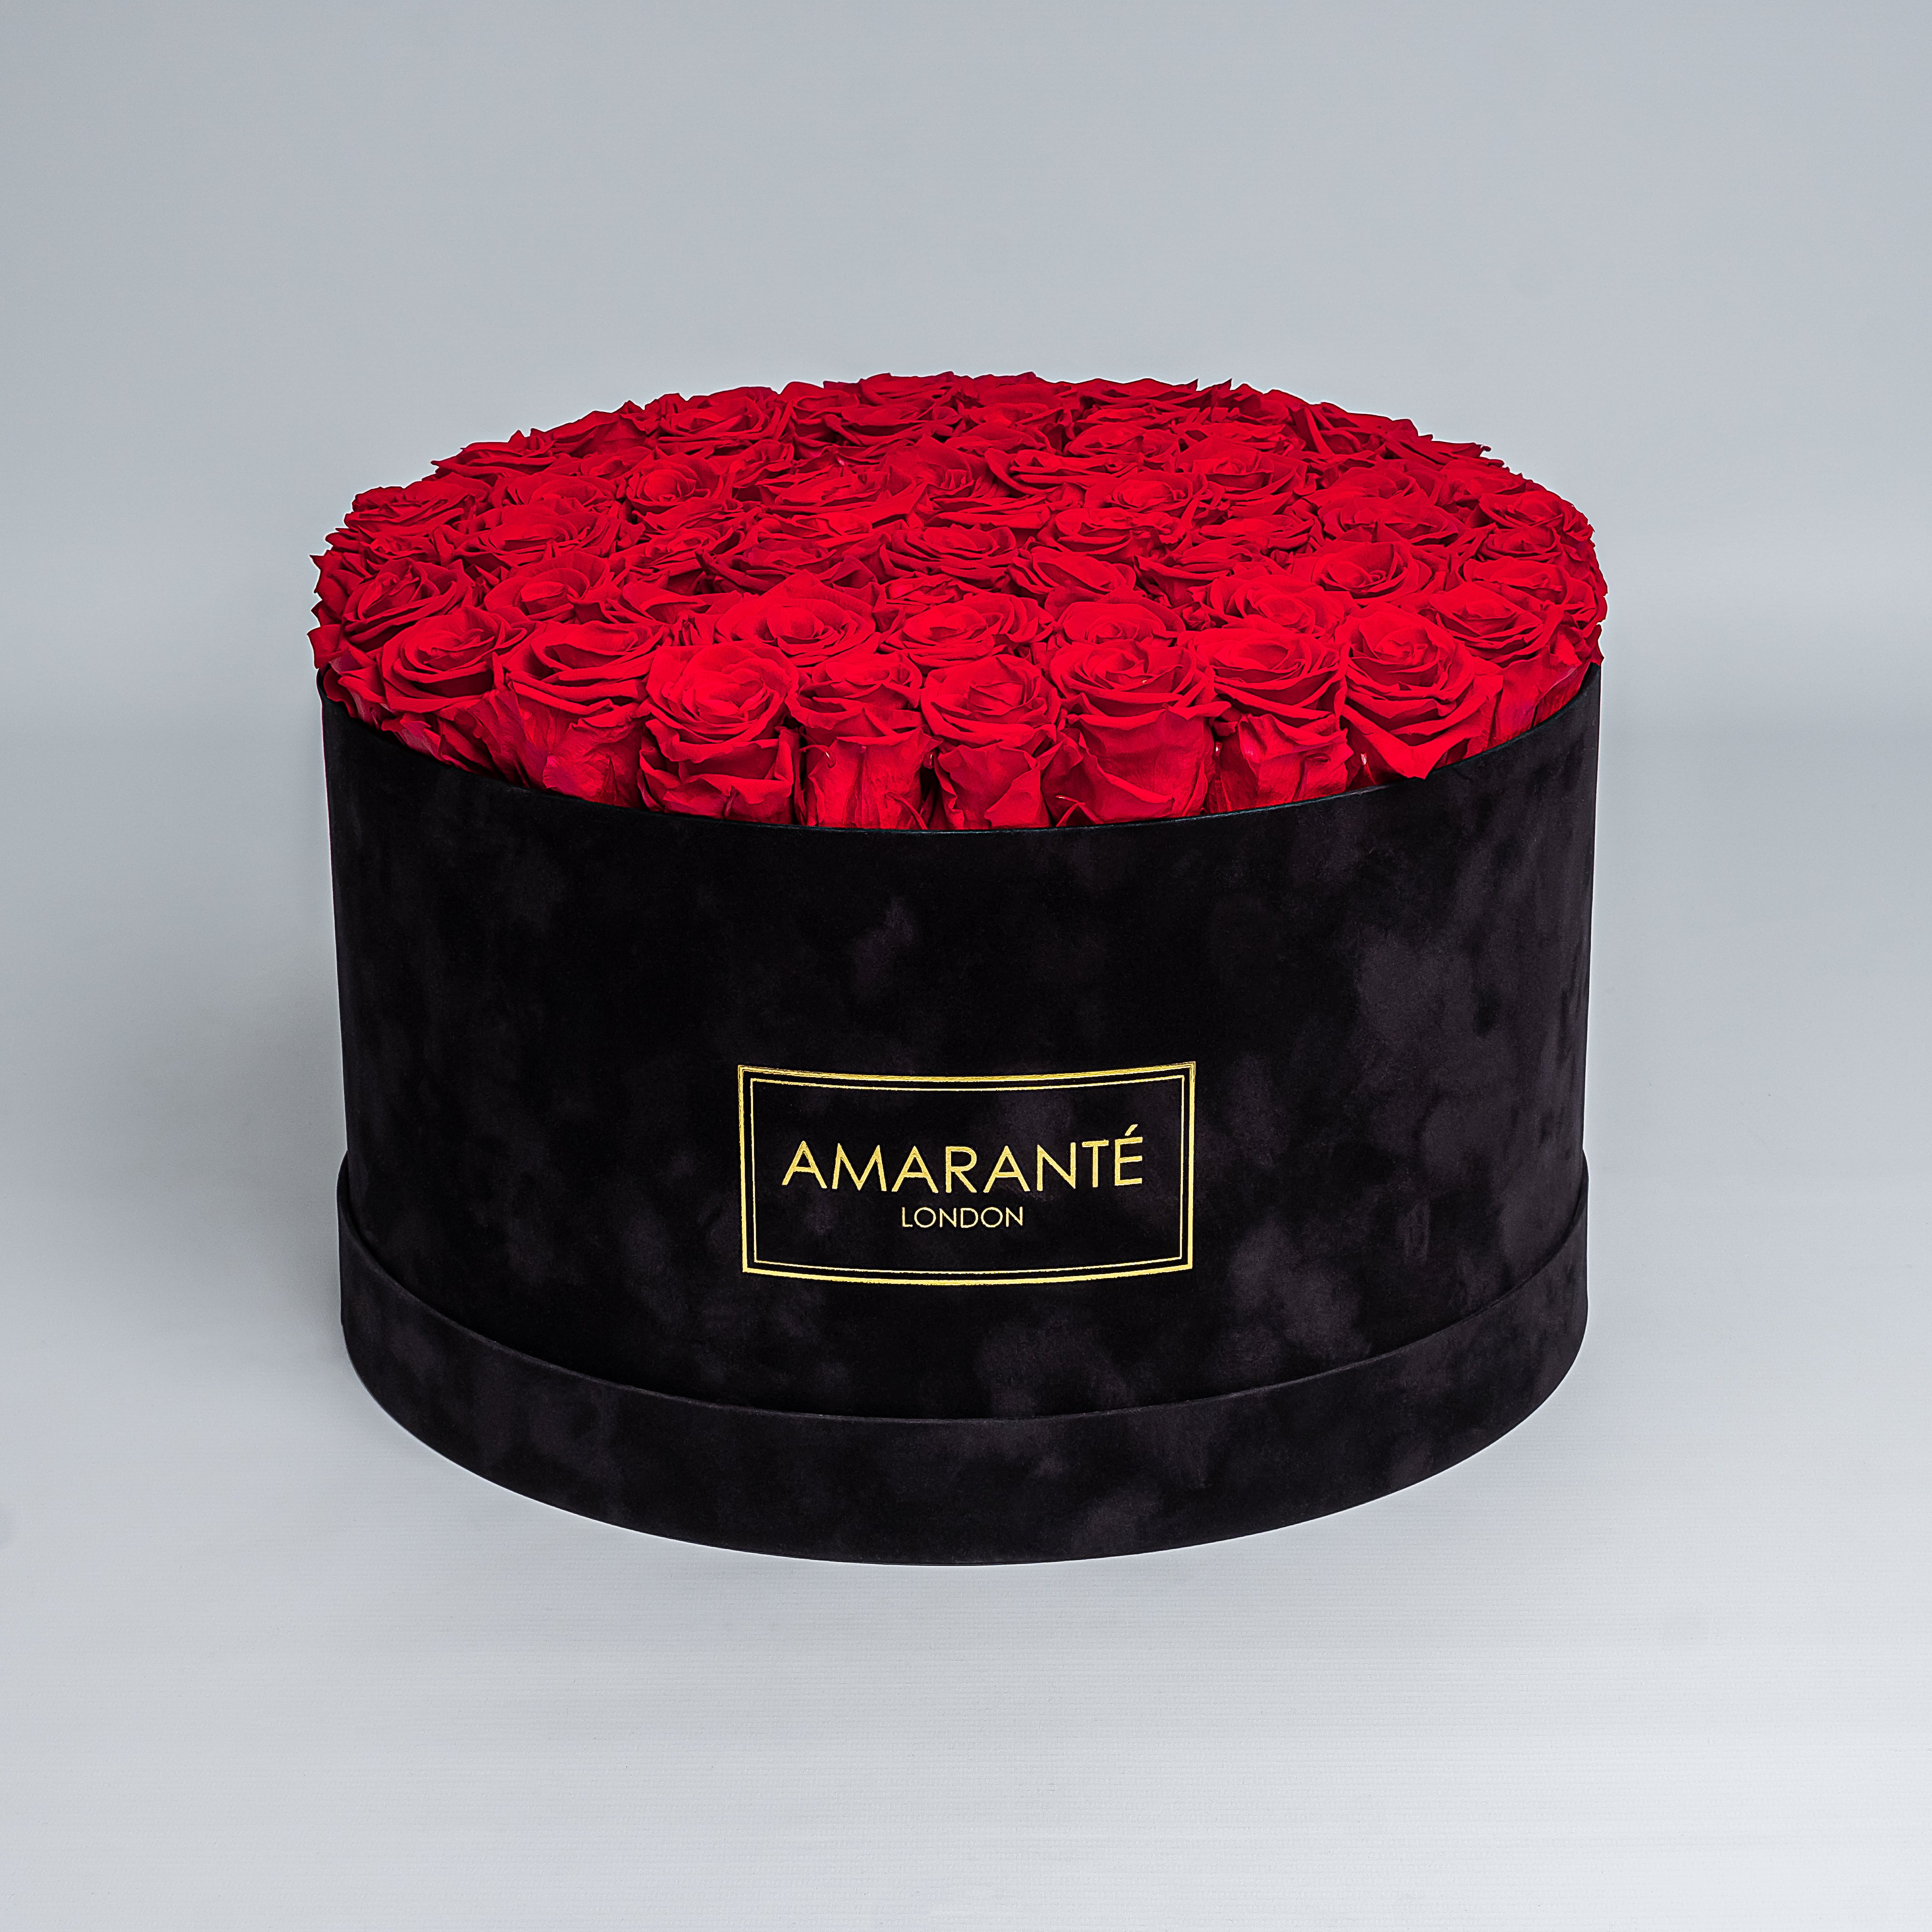 70 Exquisite bright red infinity roses elegantly arranged in a stylish black deluxe suede round rose box. Perfect for expressing timeless love and affection to family, friends and loved ones. Available for free UK delivery.